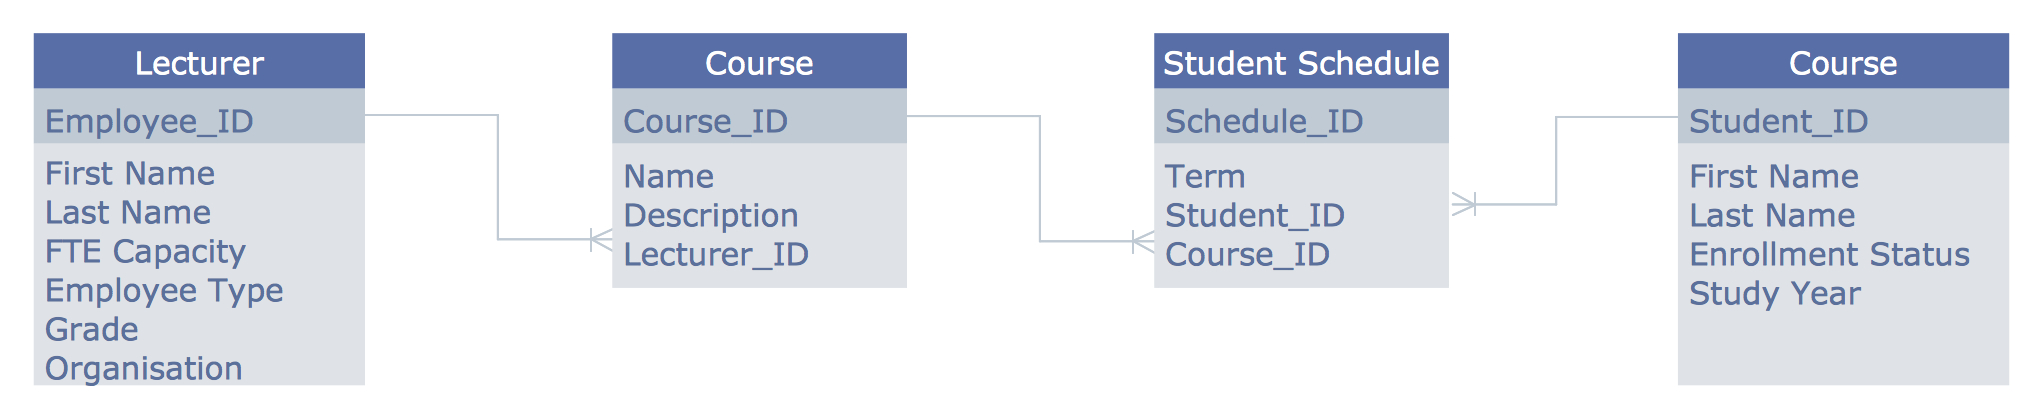 Entity Relationship Diagram (Erd) Solution | Conceptdraw with Access Erd Diagram